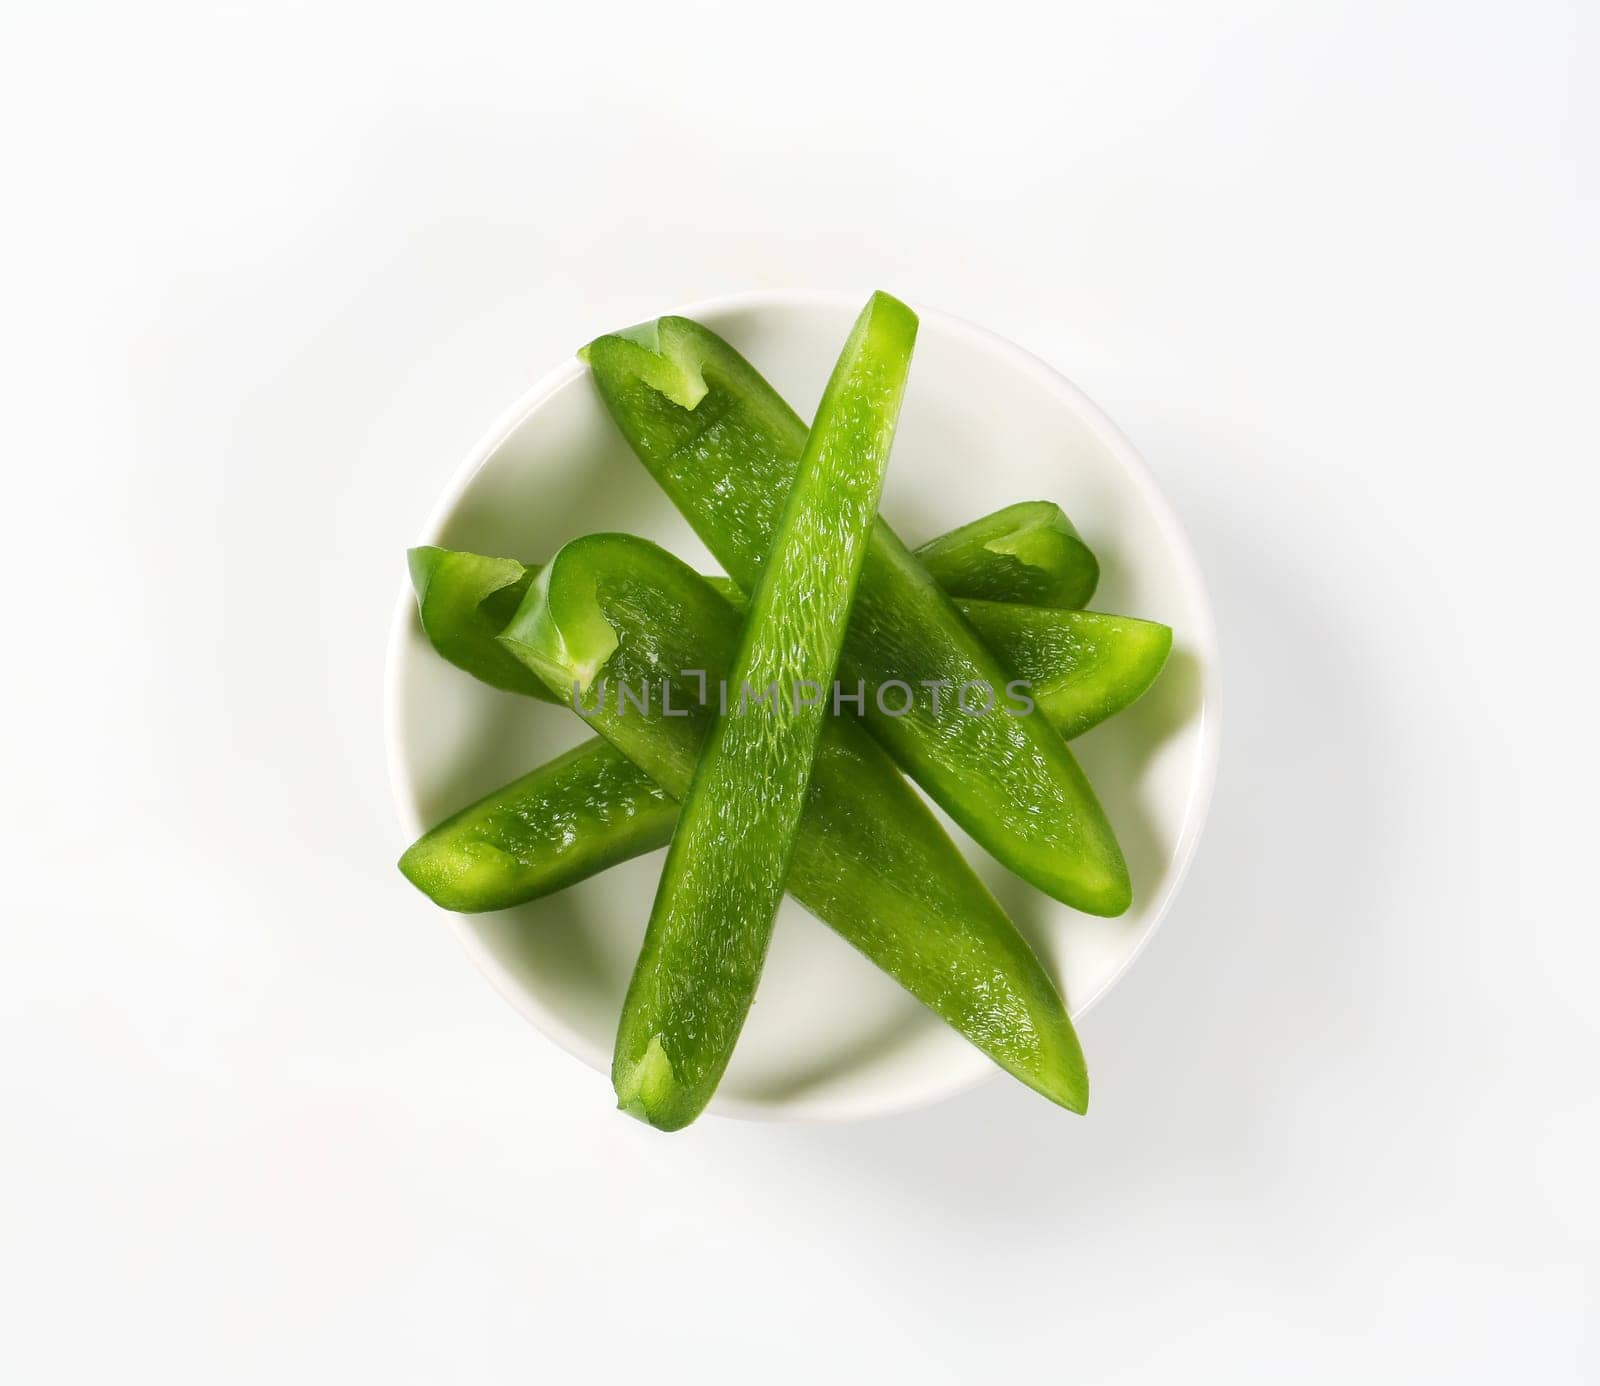 Green pepper slices by Digifoodstock